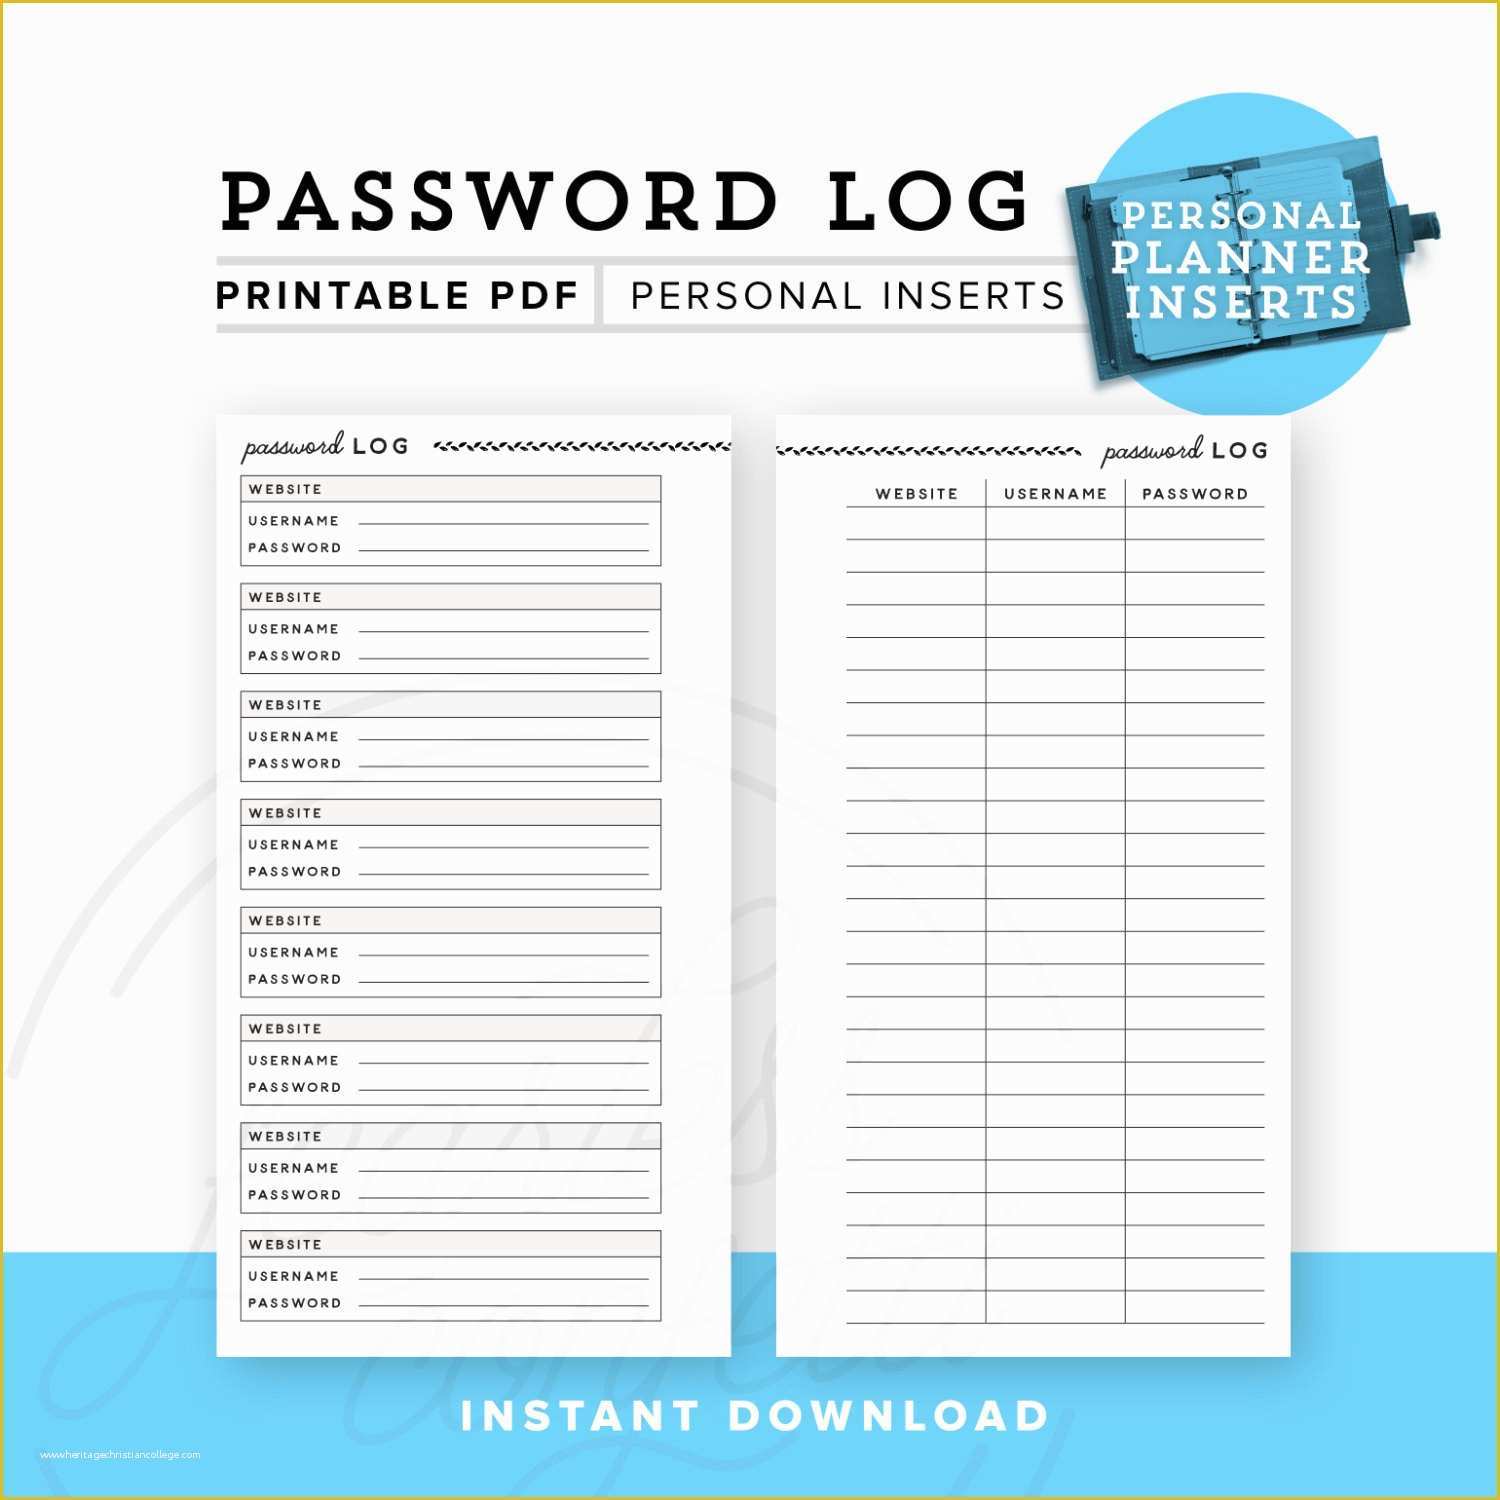 Personal Planner Template Free Of Password Log Personal Planner Printable Personal Planner